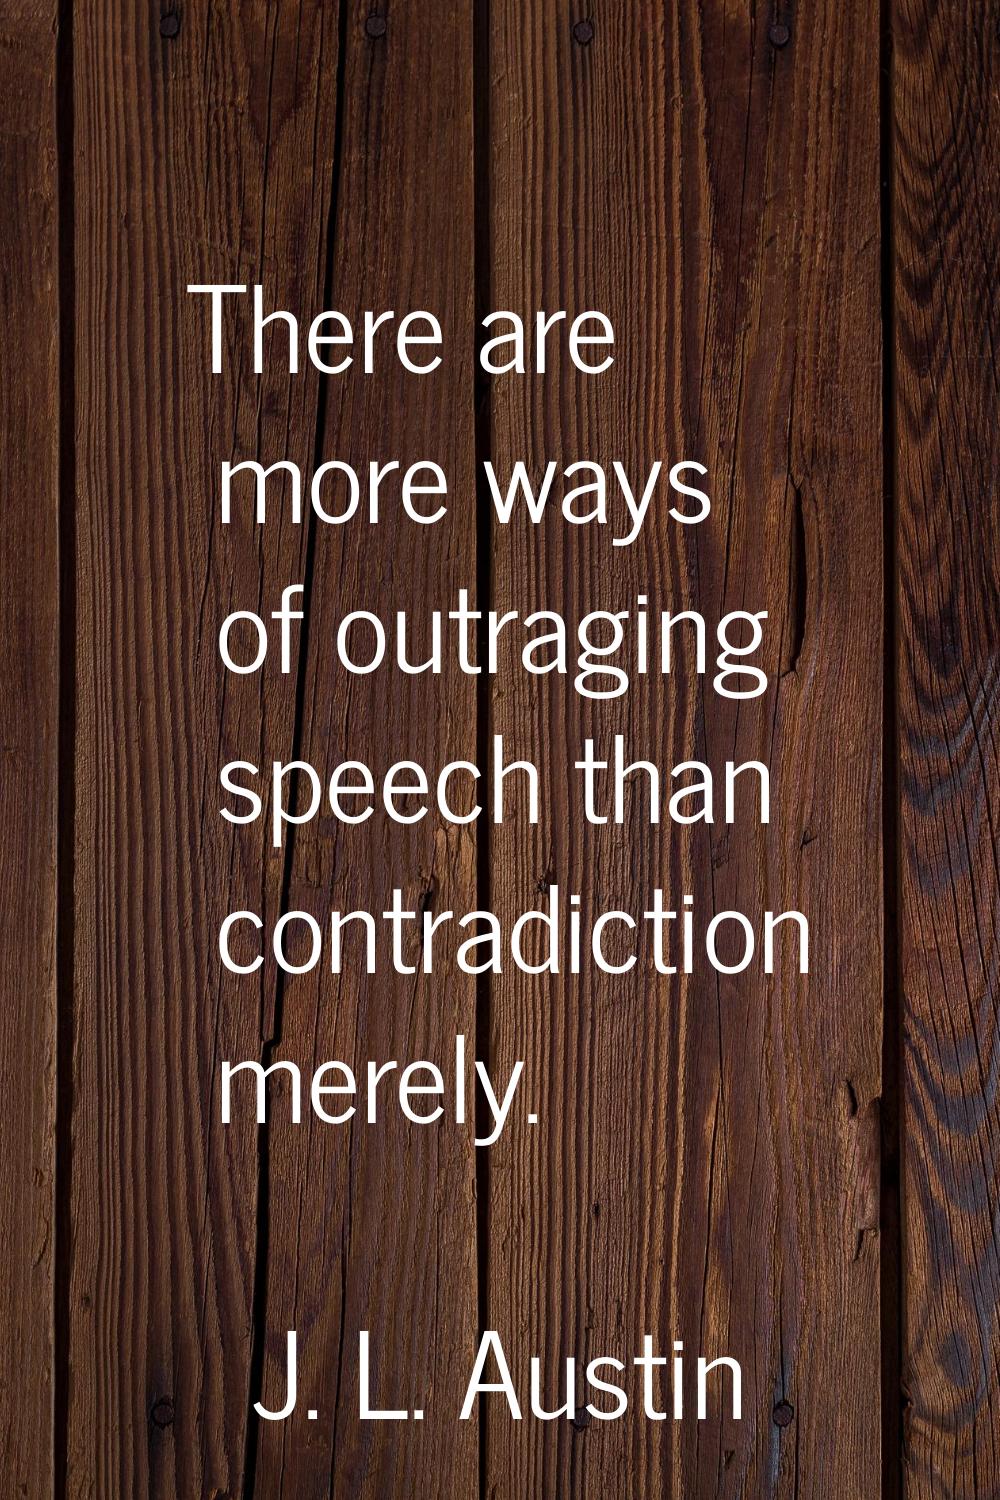 There are more ways of outraging speech than contradiction merely.